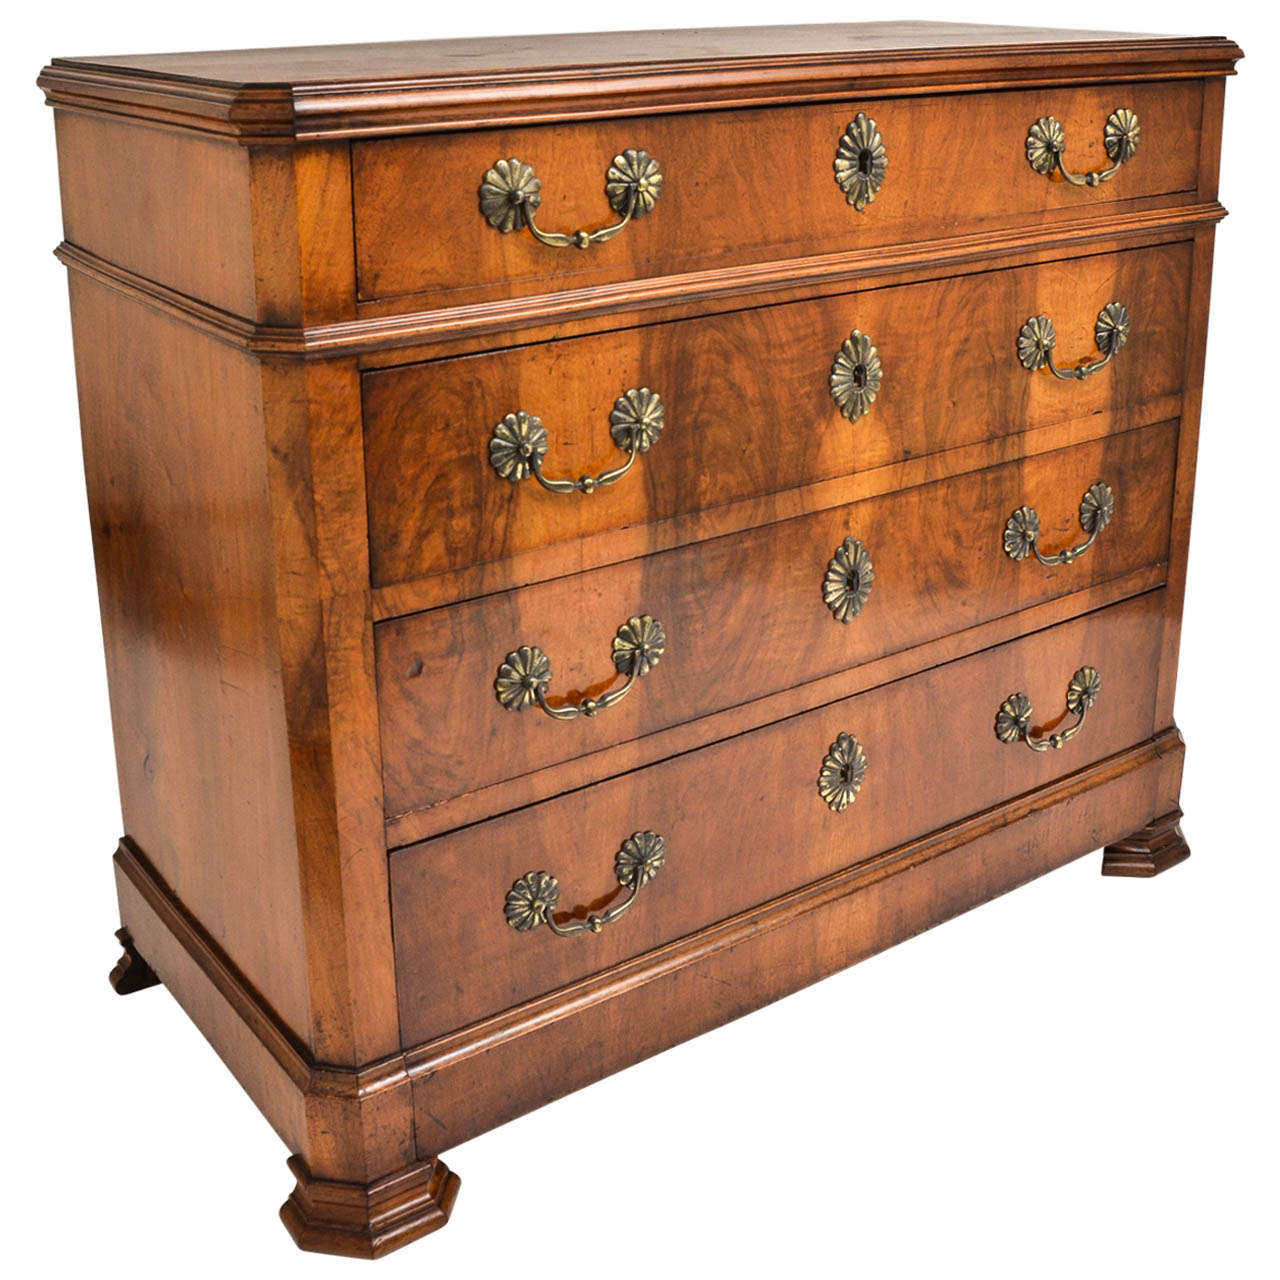 Early 19th Century French Walnut Chest of Drawers